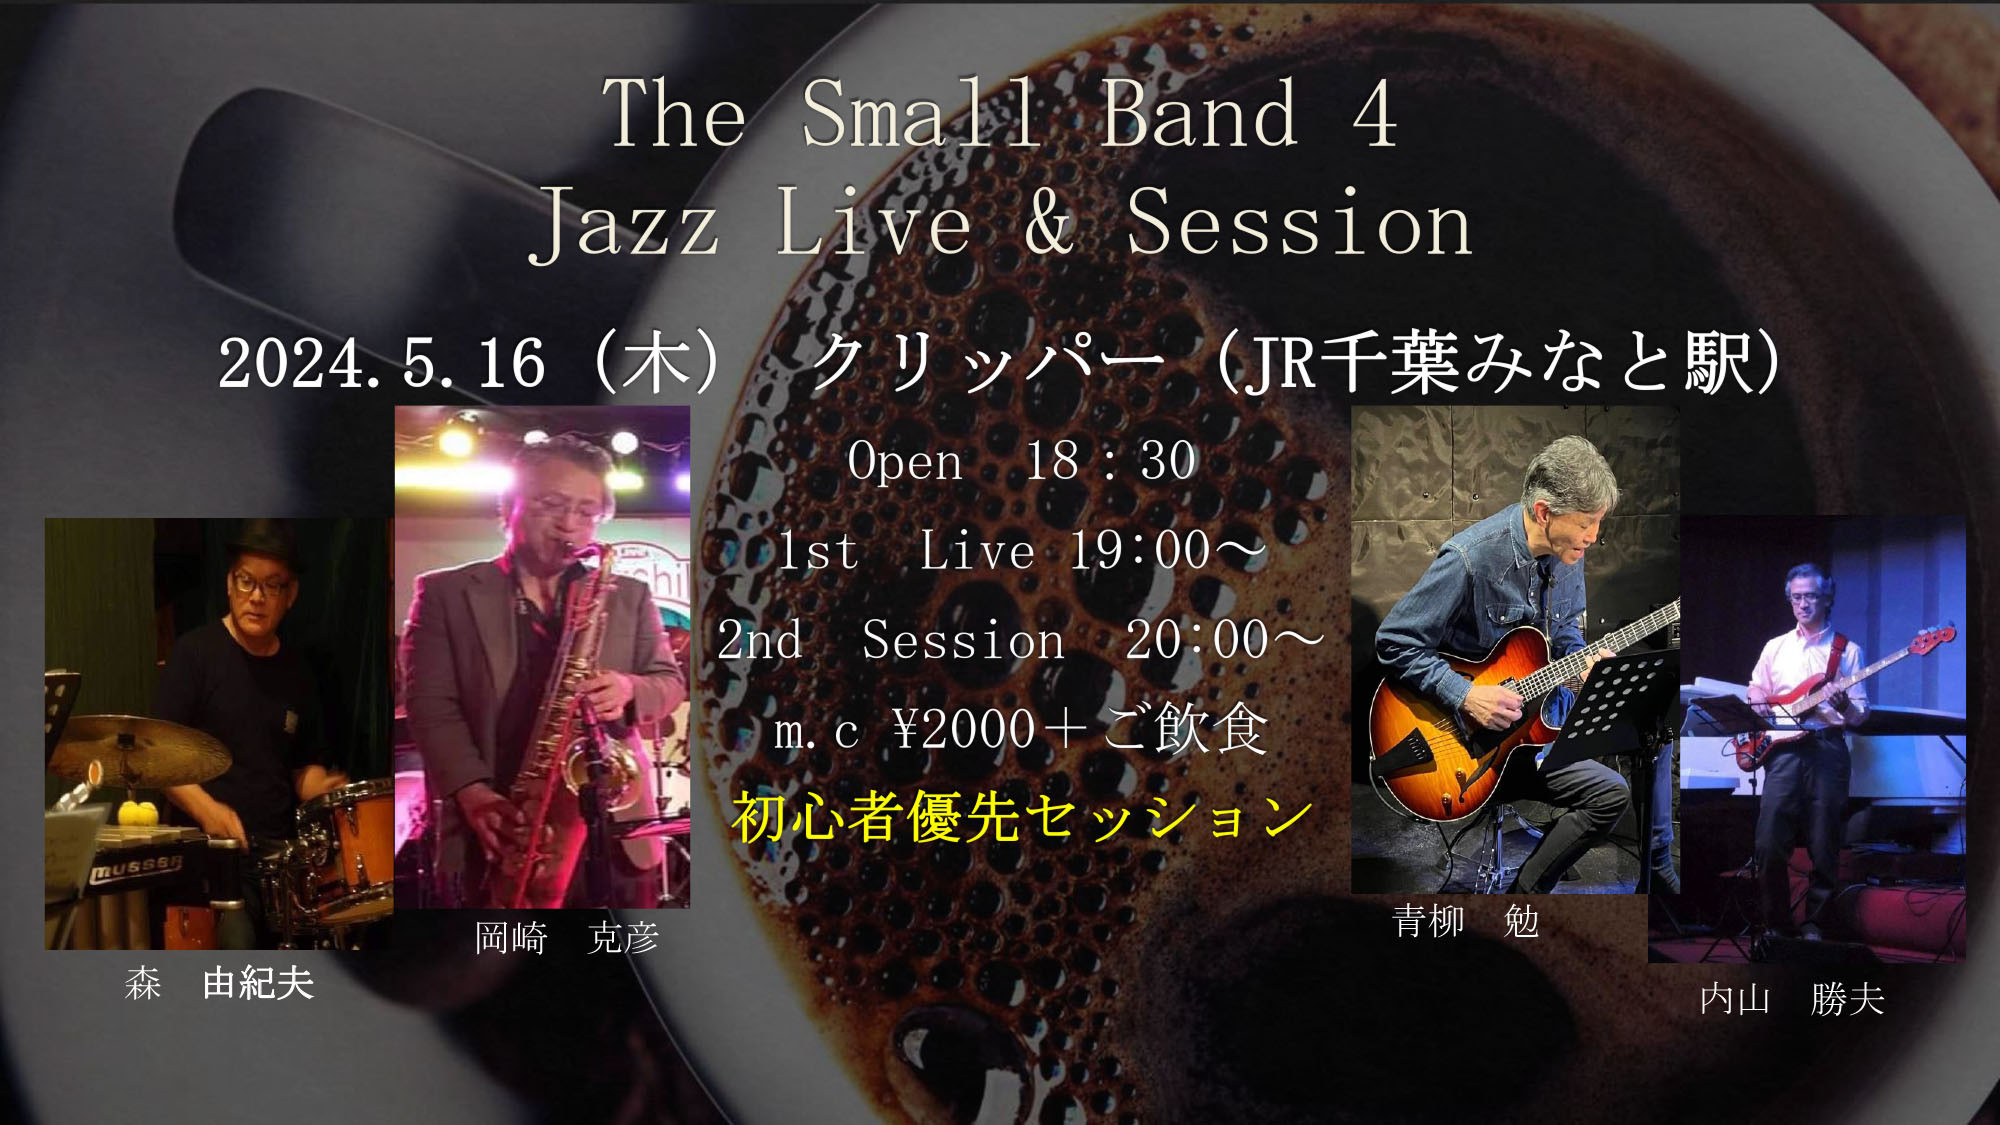 The Small Band 4